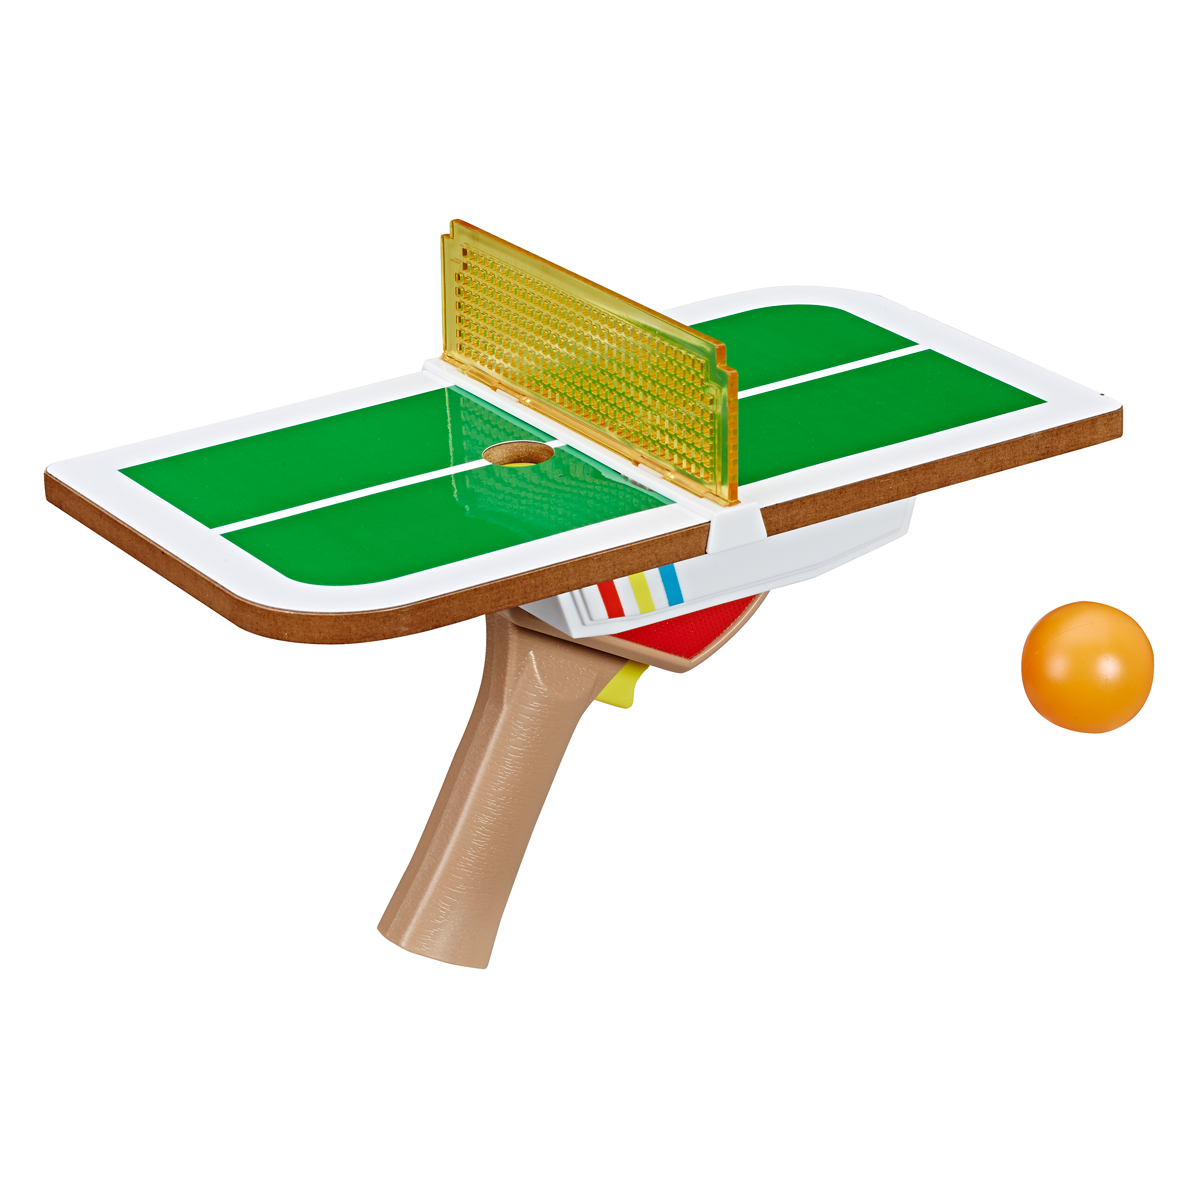 Tiny Pong Solo Table Tennis